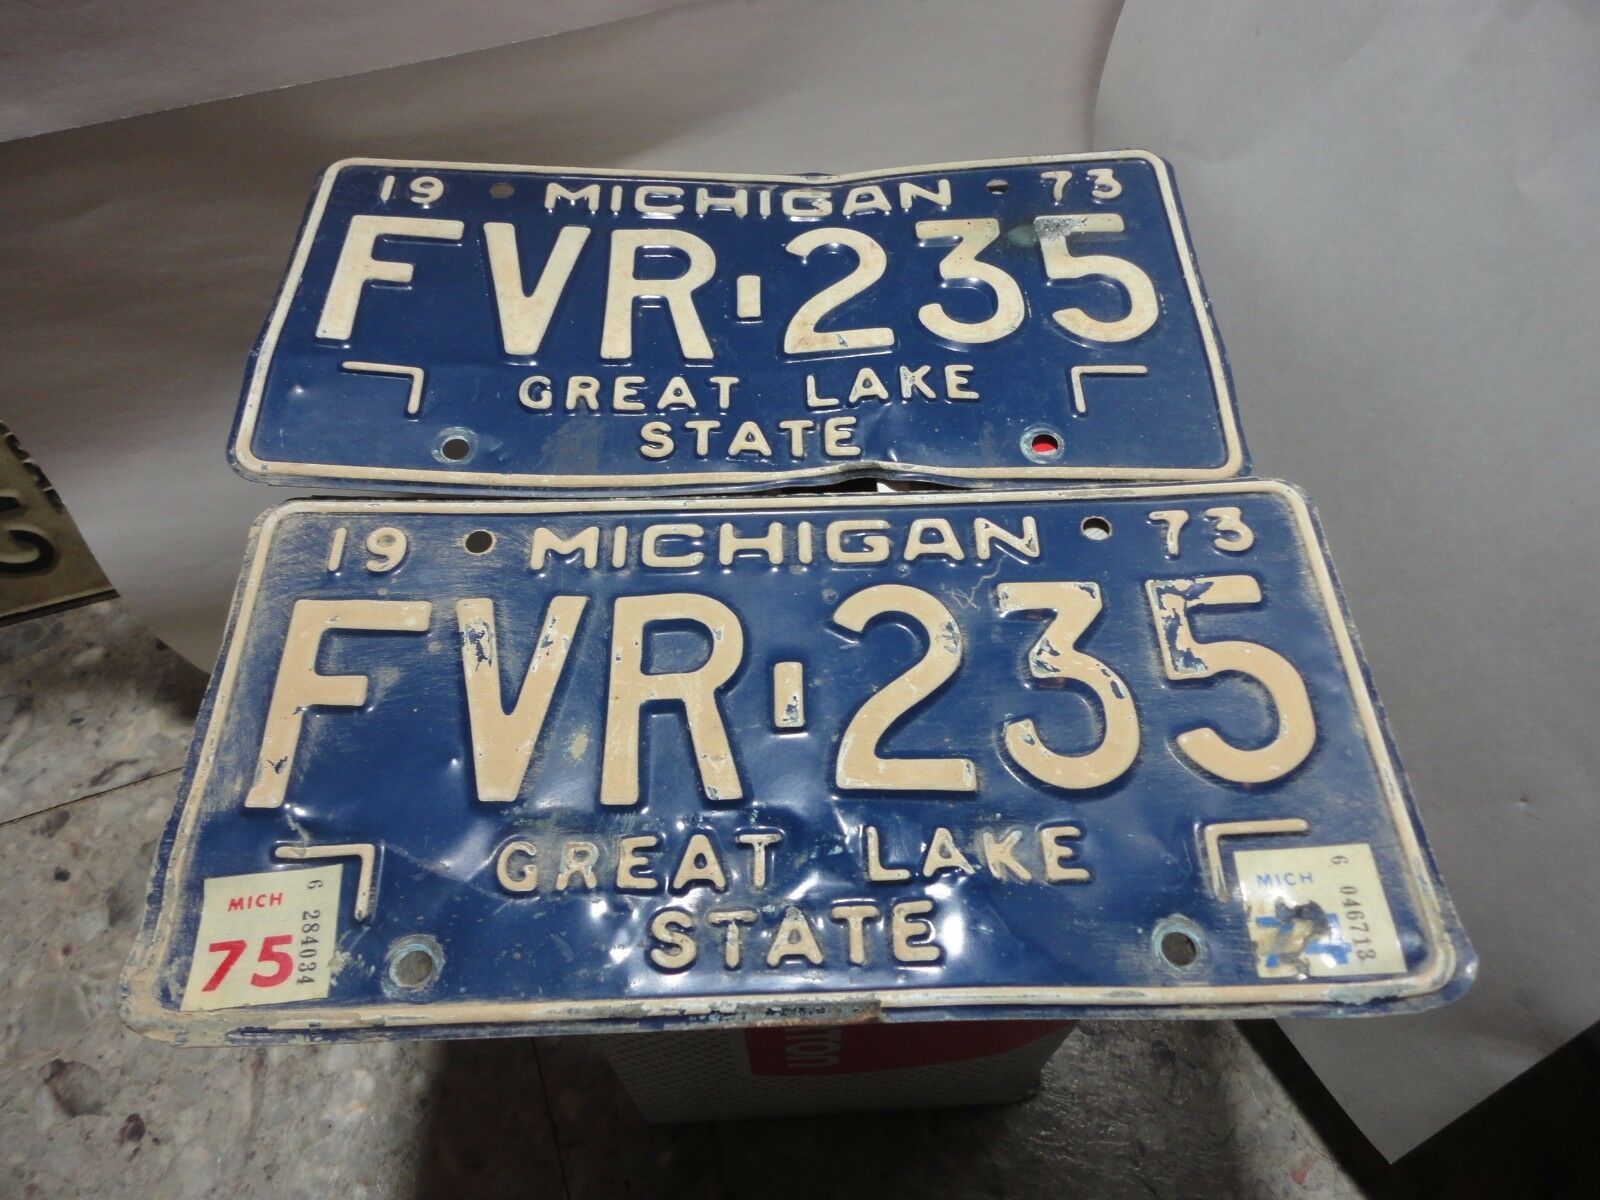 Primary image for 1973 MICHIGAN STATE LICENSE PLATES MATCHED SET FVR-235 FORD CHEVY PONTIAC DODGE